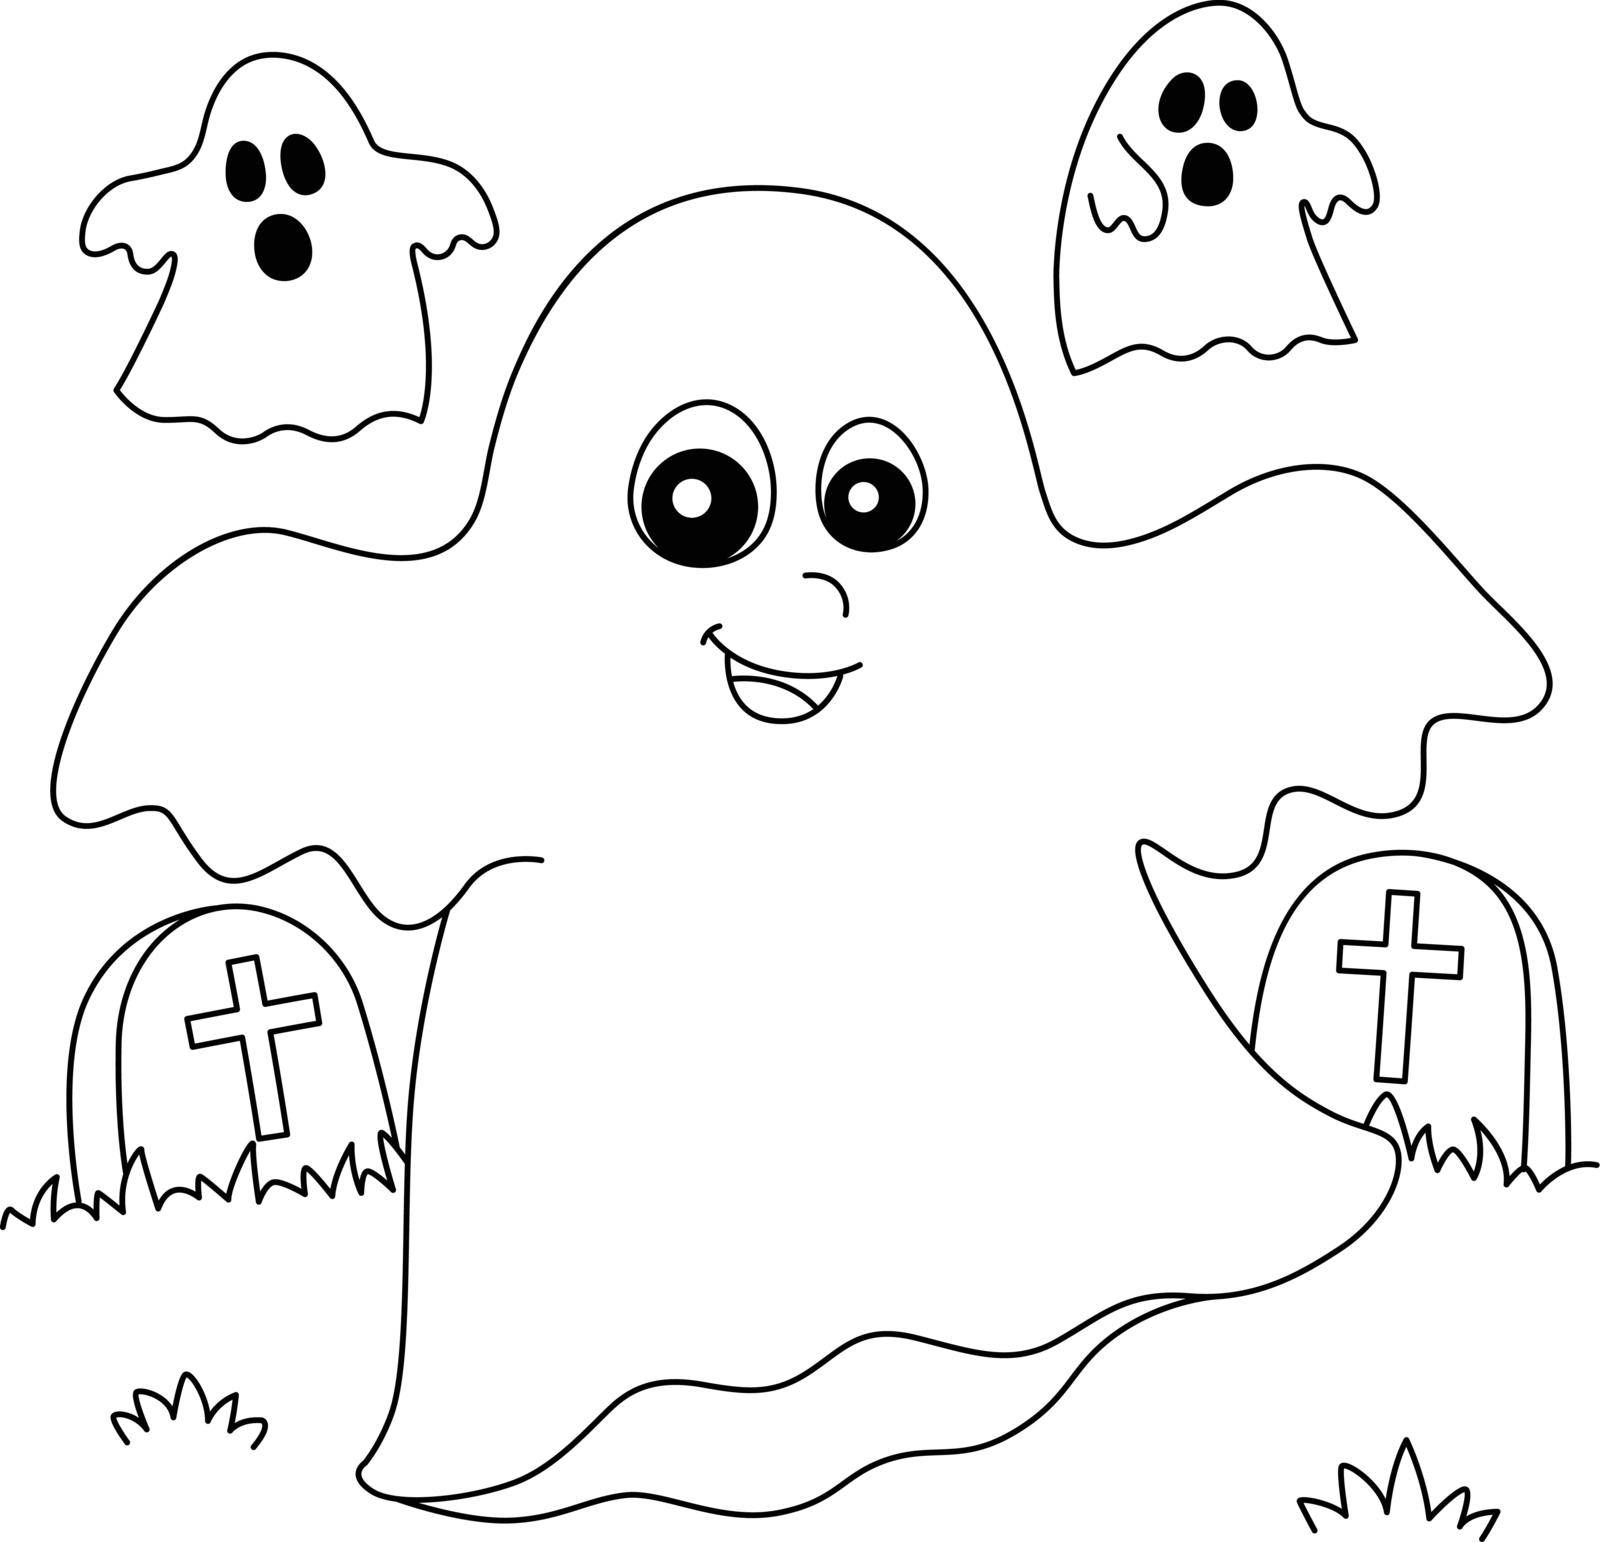 A cute and funny coloring page of a ghost on halloween. Provides hours of coloring fun for children. To color, this page is very easy. Suitable for little kids and toddlers.